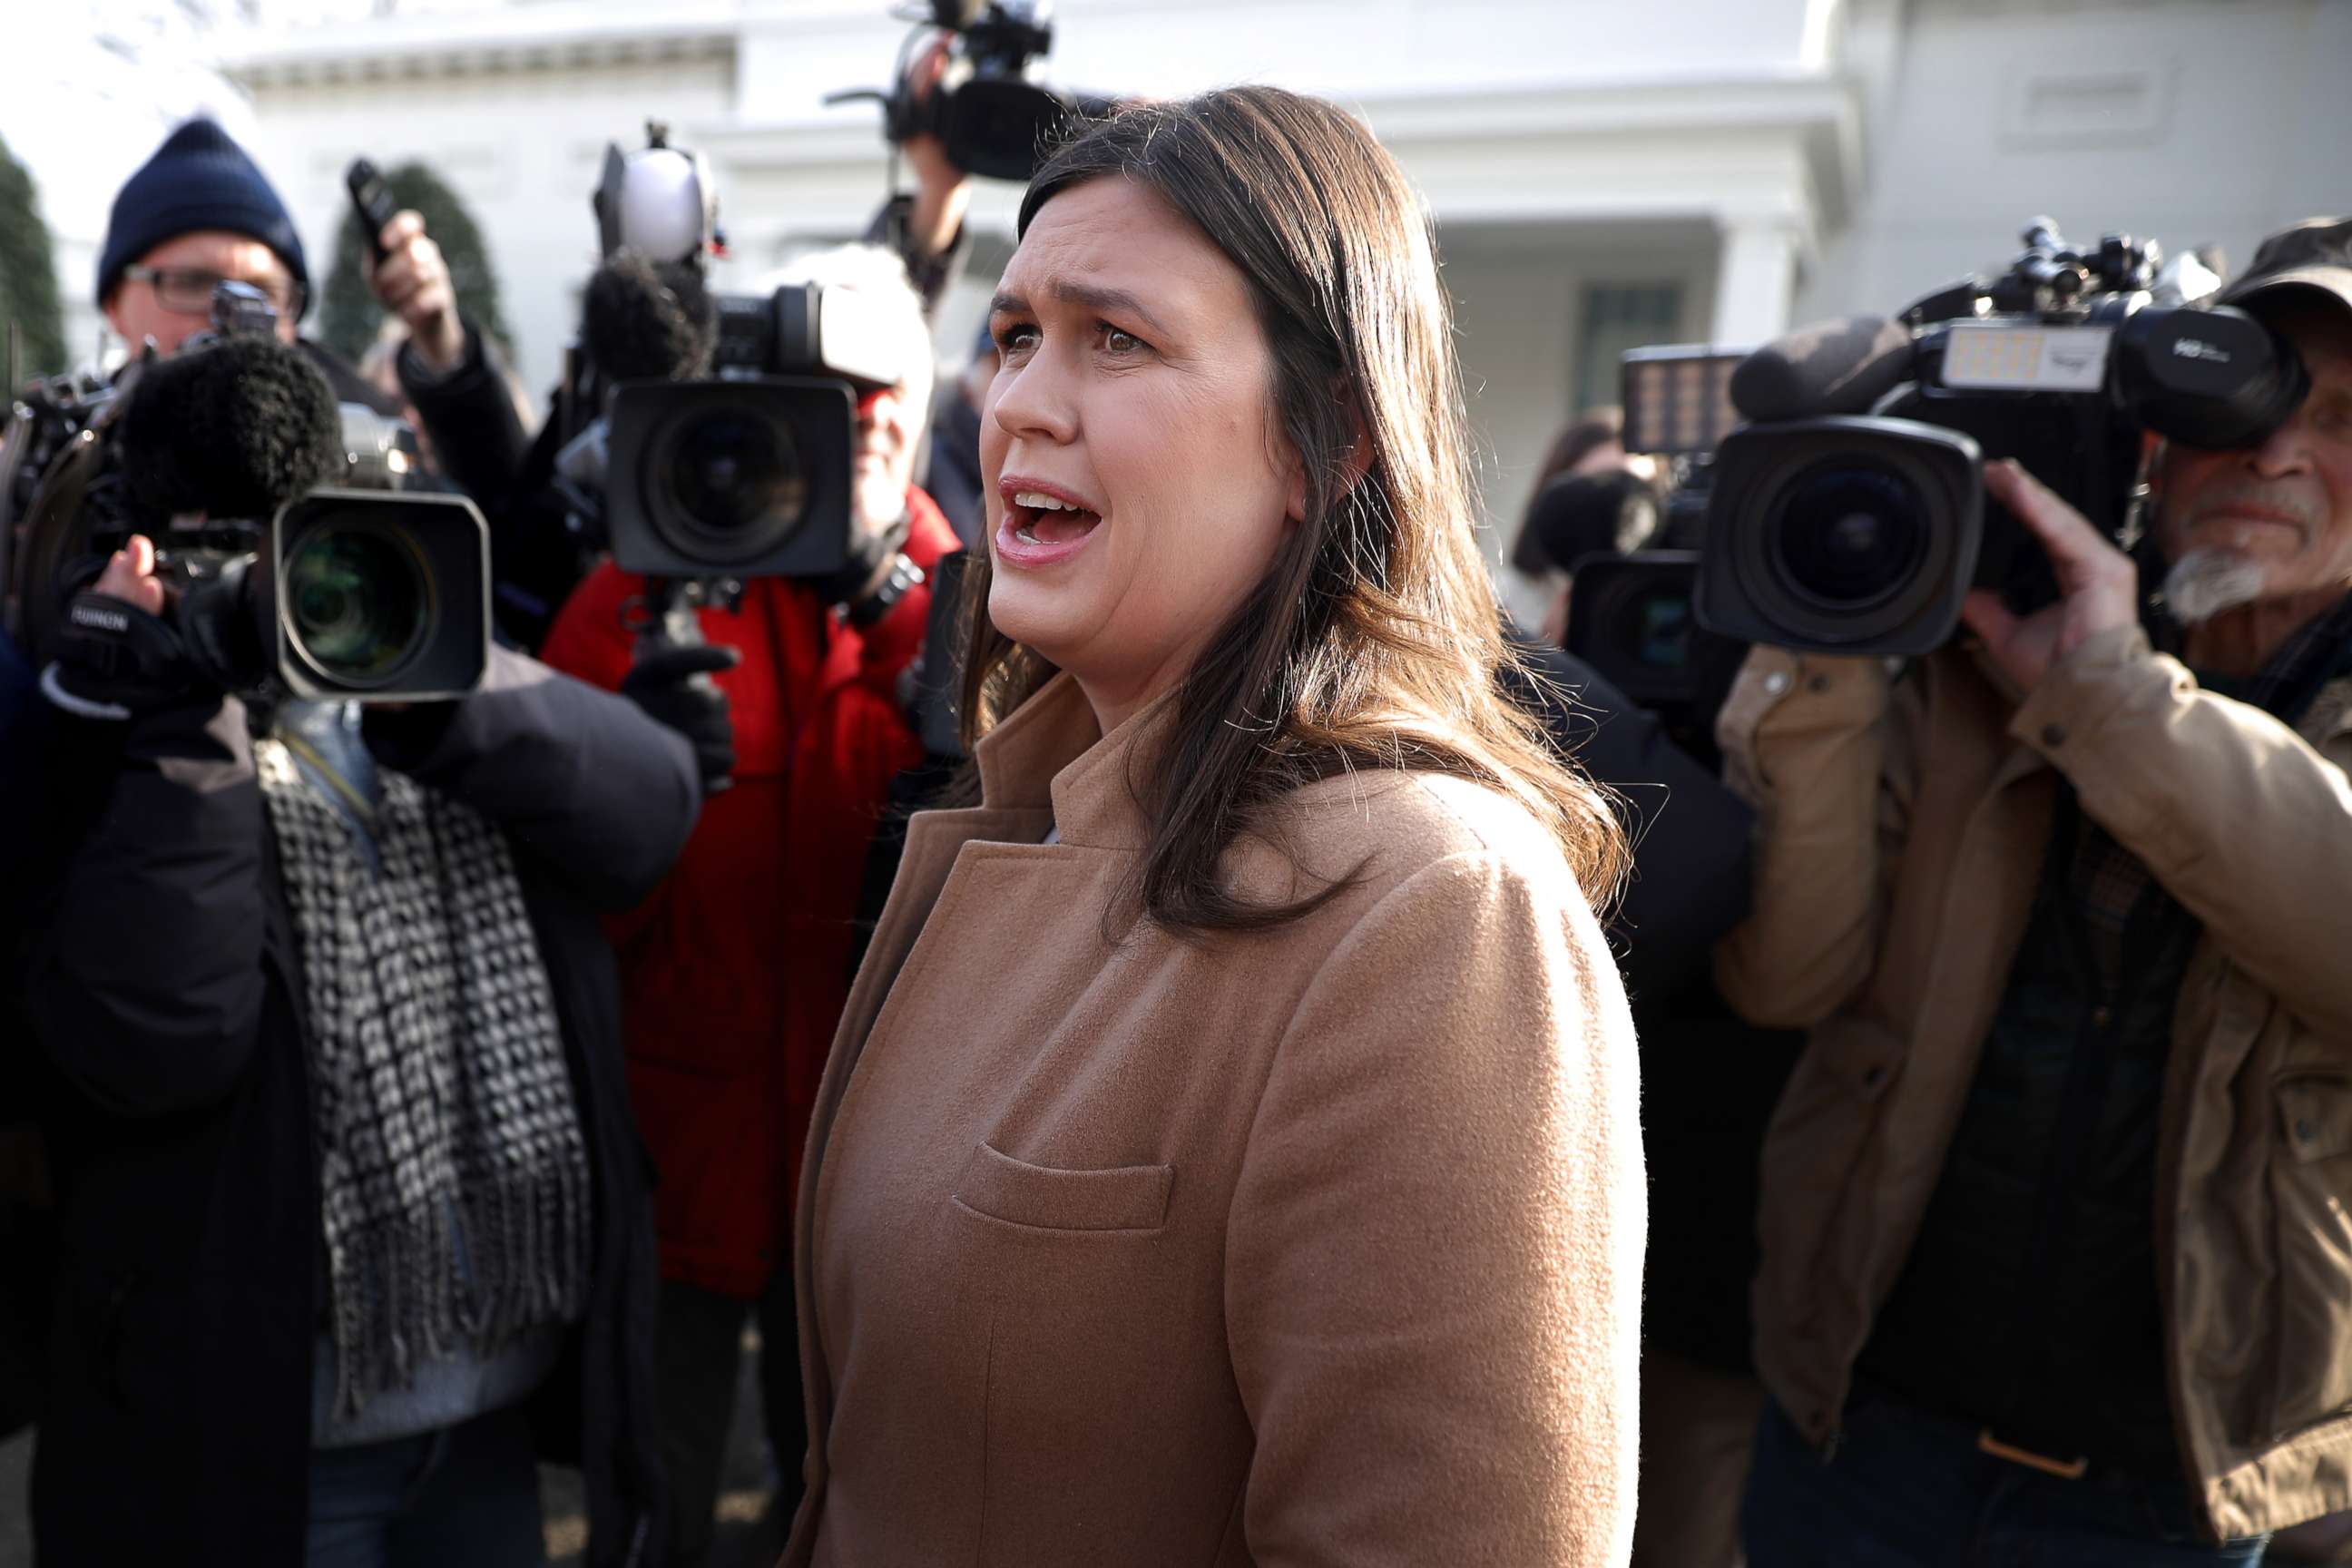 PHOTO: White House Press Secretary Sarah Huckabee Sanders talks to reporters outside the West Wing of the White House, Jan. 18, 2019.